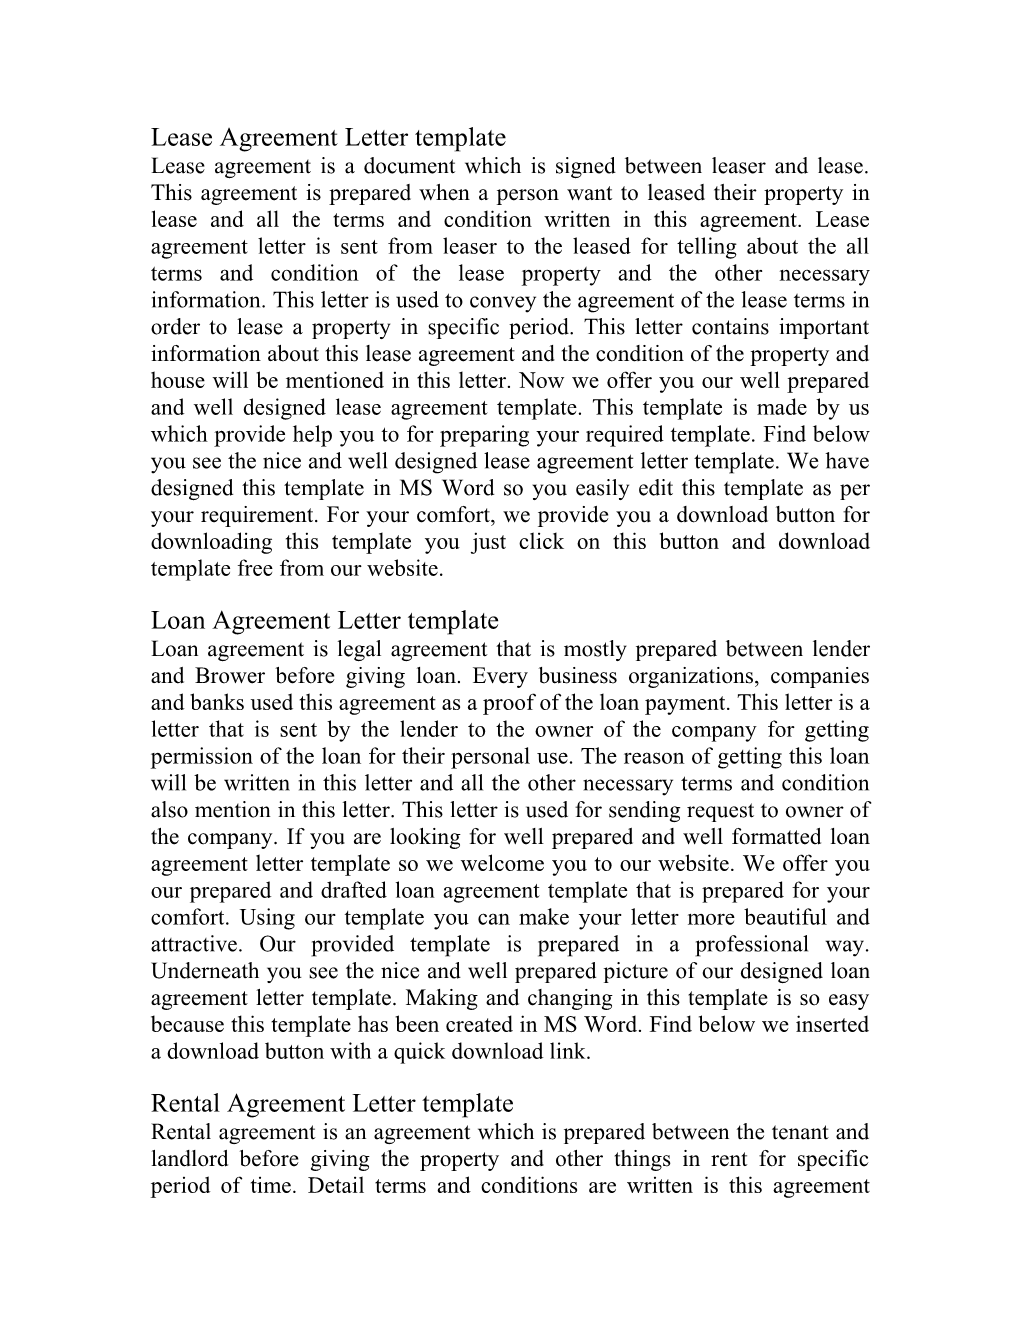 Lease Agreement Letter Template